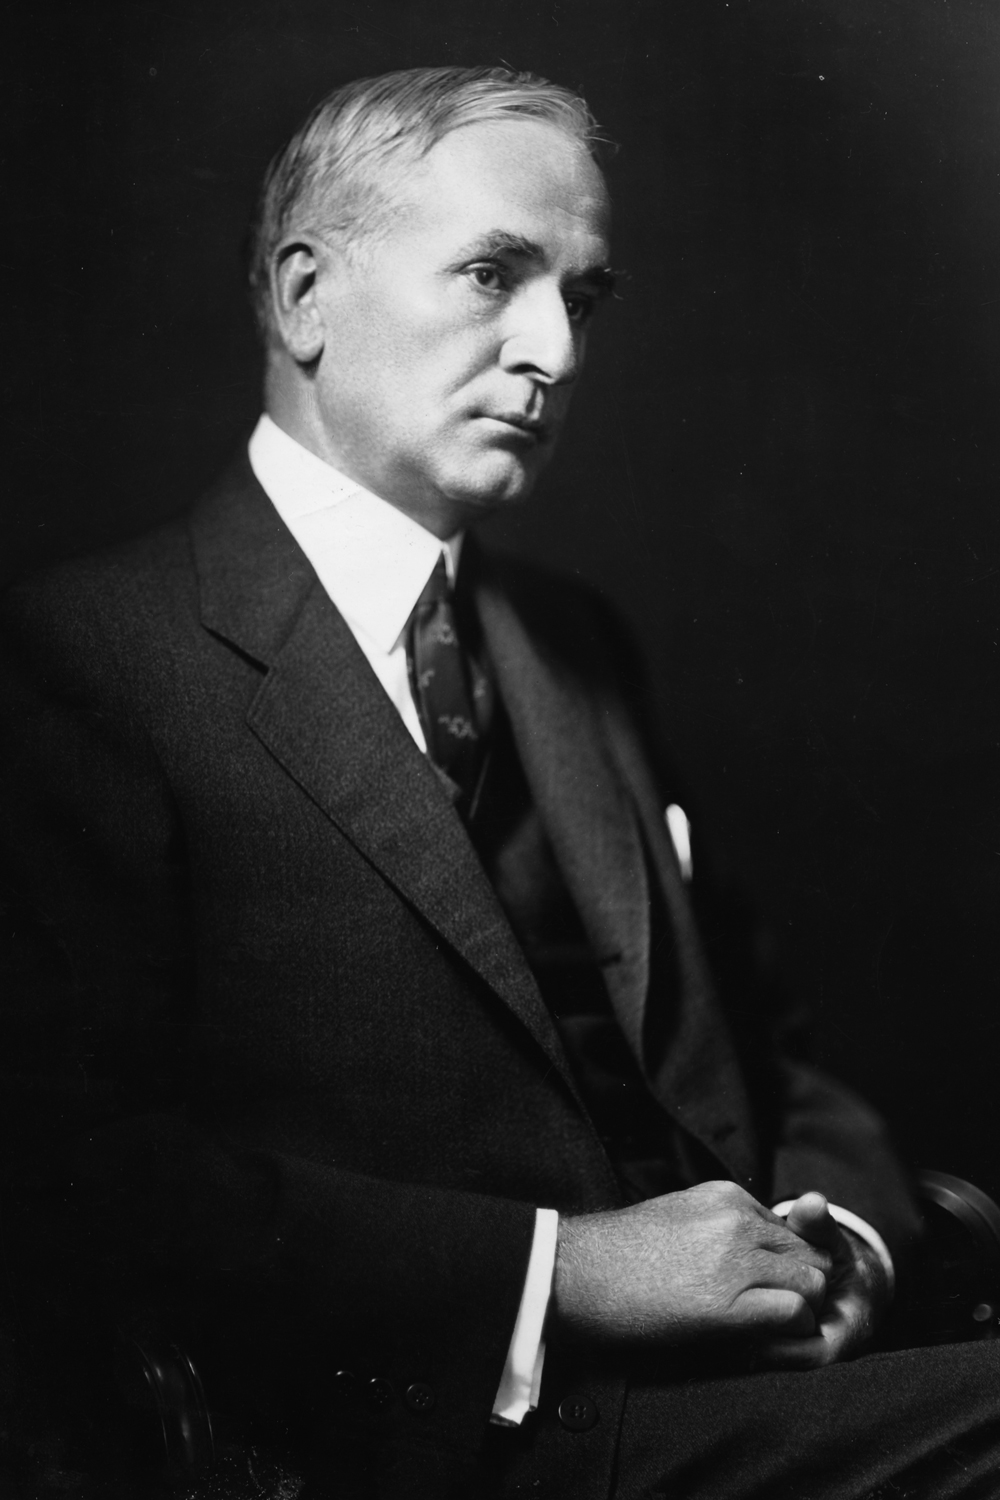 A photo of Cordell Hull